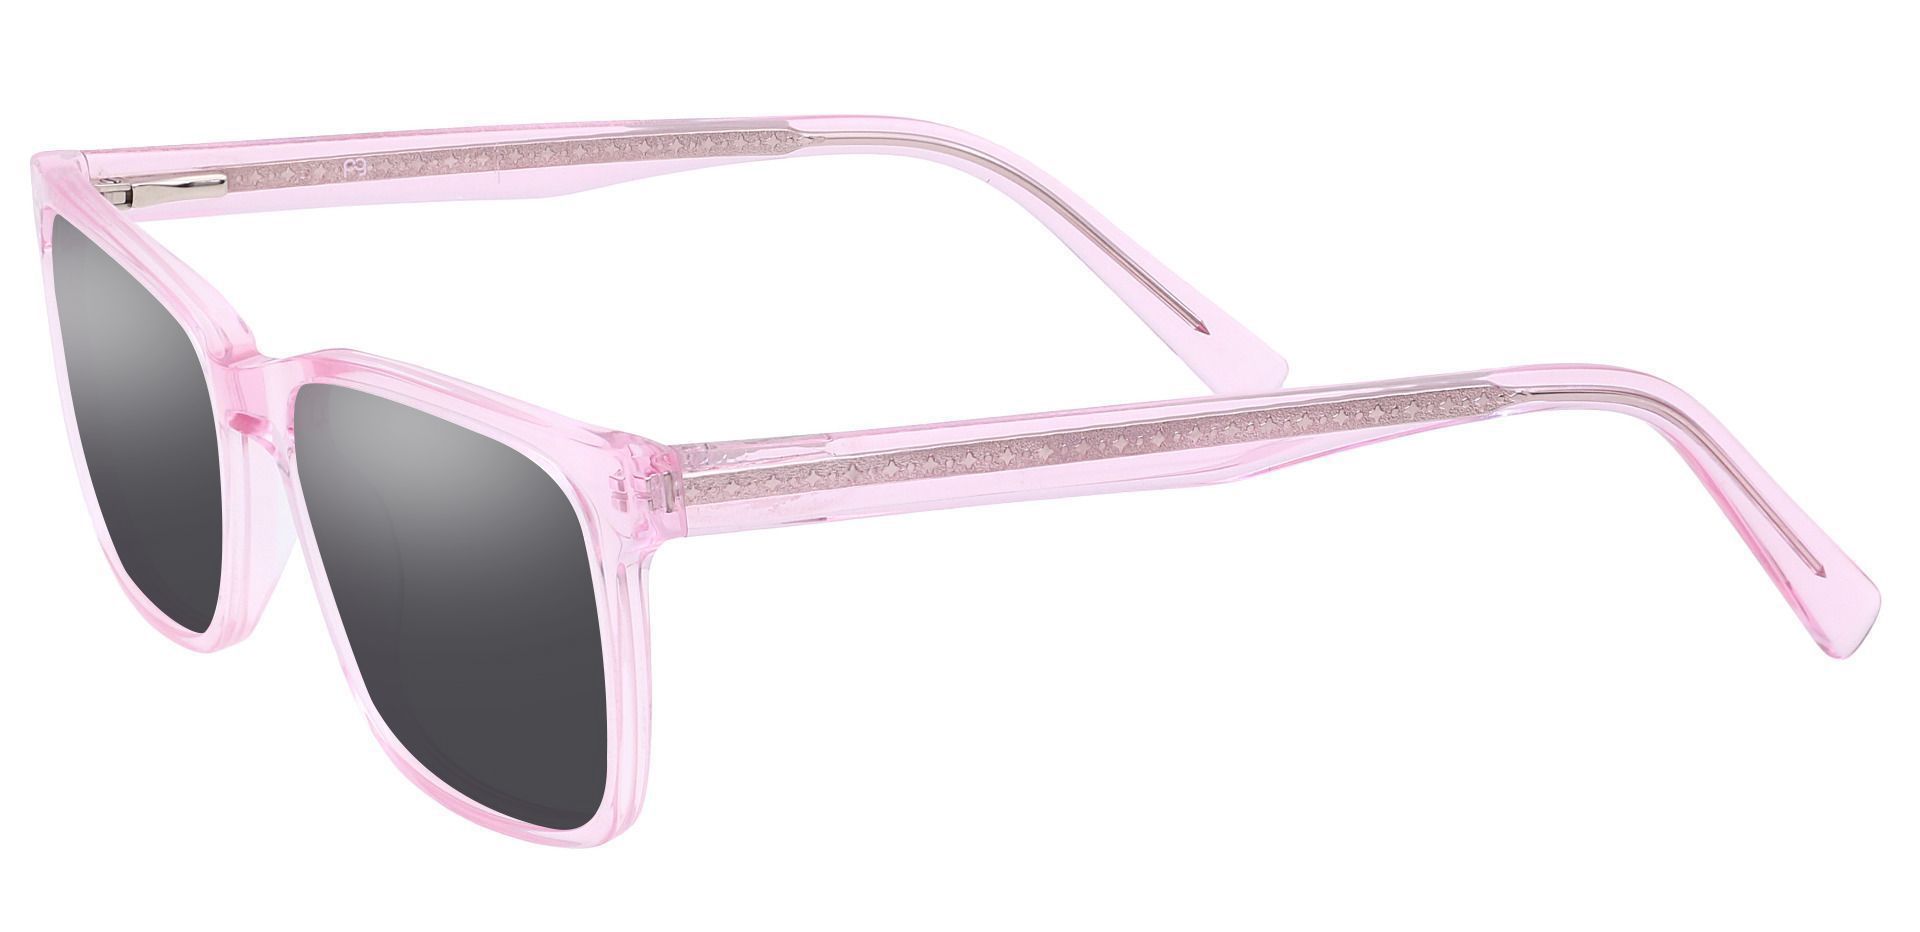 Galaxy Rectangle Prescription Sunglasses - Pink Frame With Gray Lenses